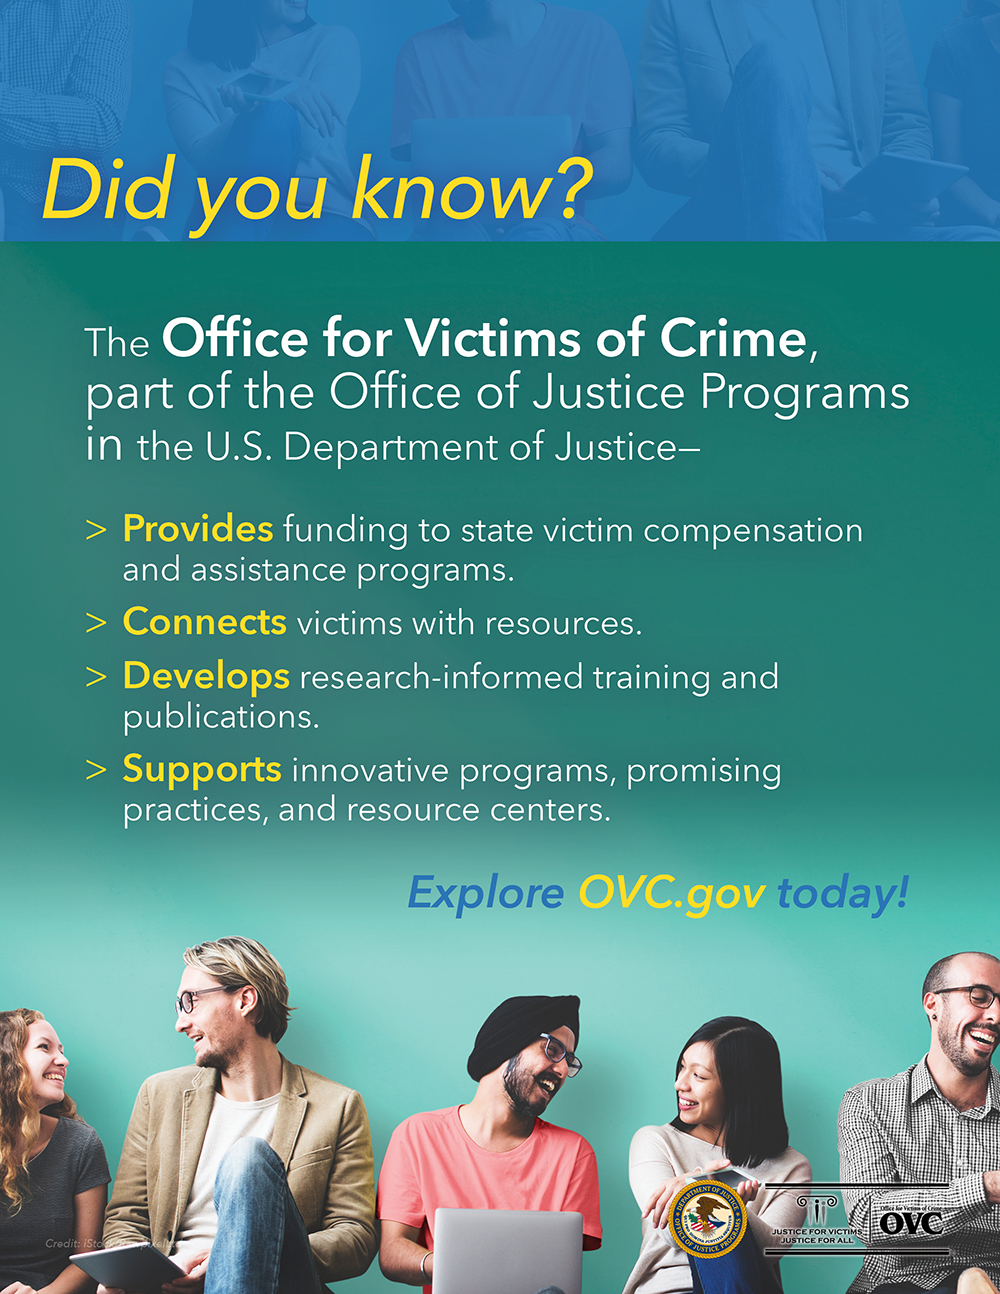 Did you know? • The Office for Victims of Crime of the U.S Department of Justice- ⁃Provides funding to state victim compensation and assistance programs. ⁃Develops research-informed training and publications. ⁃Supports innovative programs and promising practices. ⁃Connects victims with resources. • Explore OVC.gov today!